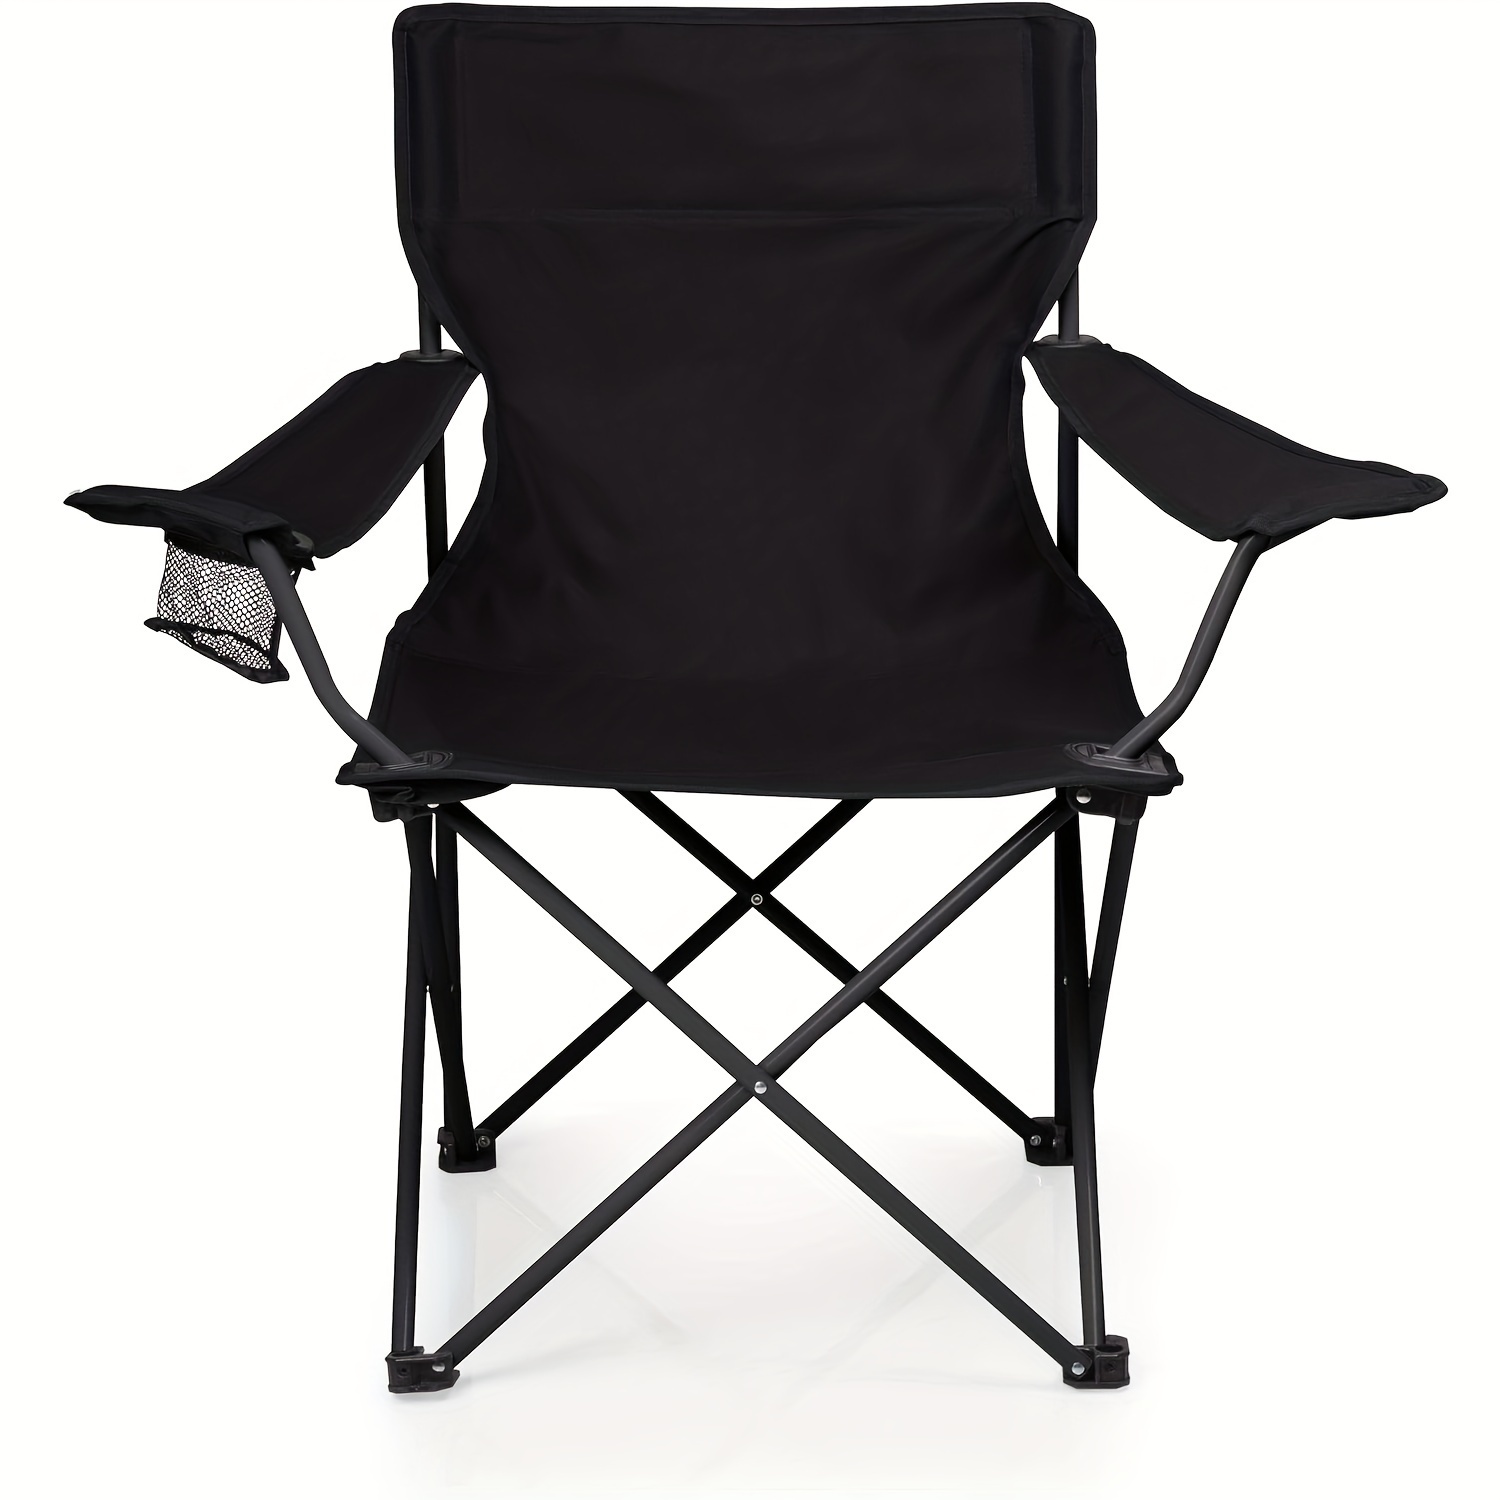 1pc Portable Folding Lounge Chair 9 Gears Adjustable Chair With Cushion For  Outdoor Beach Camping Office Lunch Break Nap And Home, Don't Miss These  Great Deals